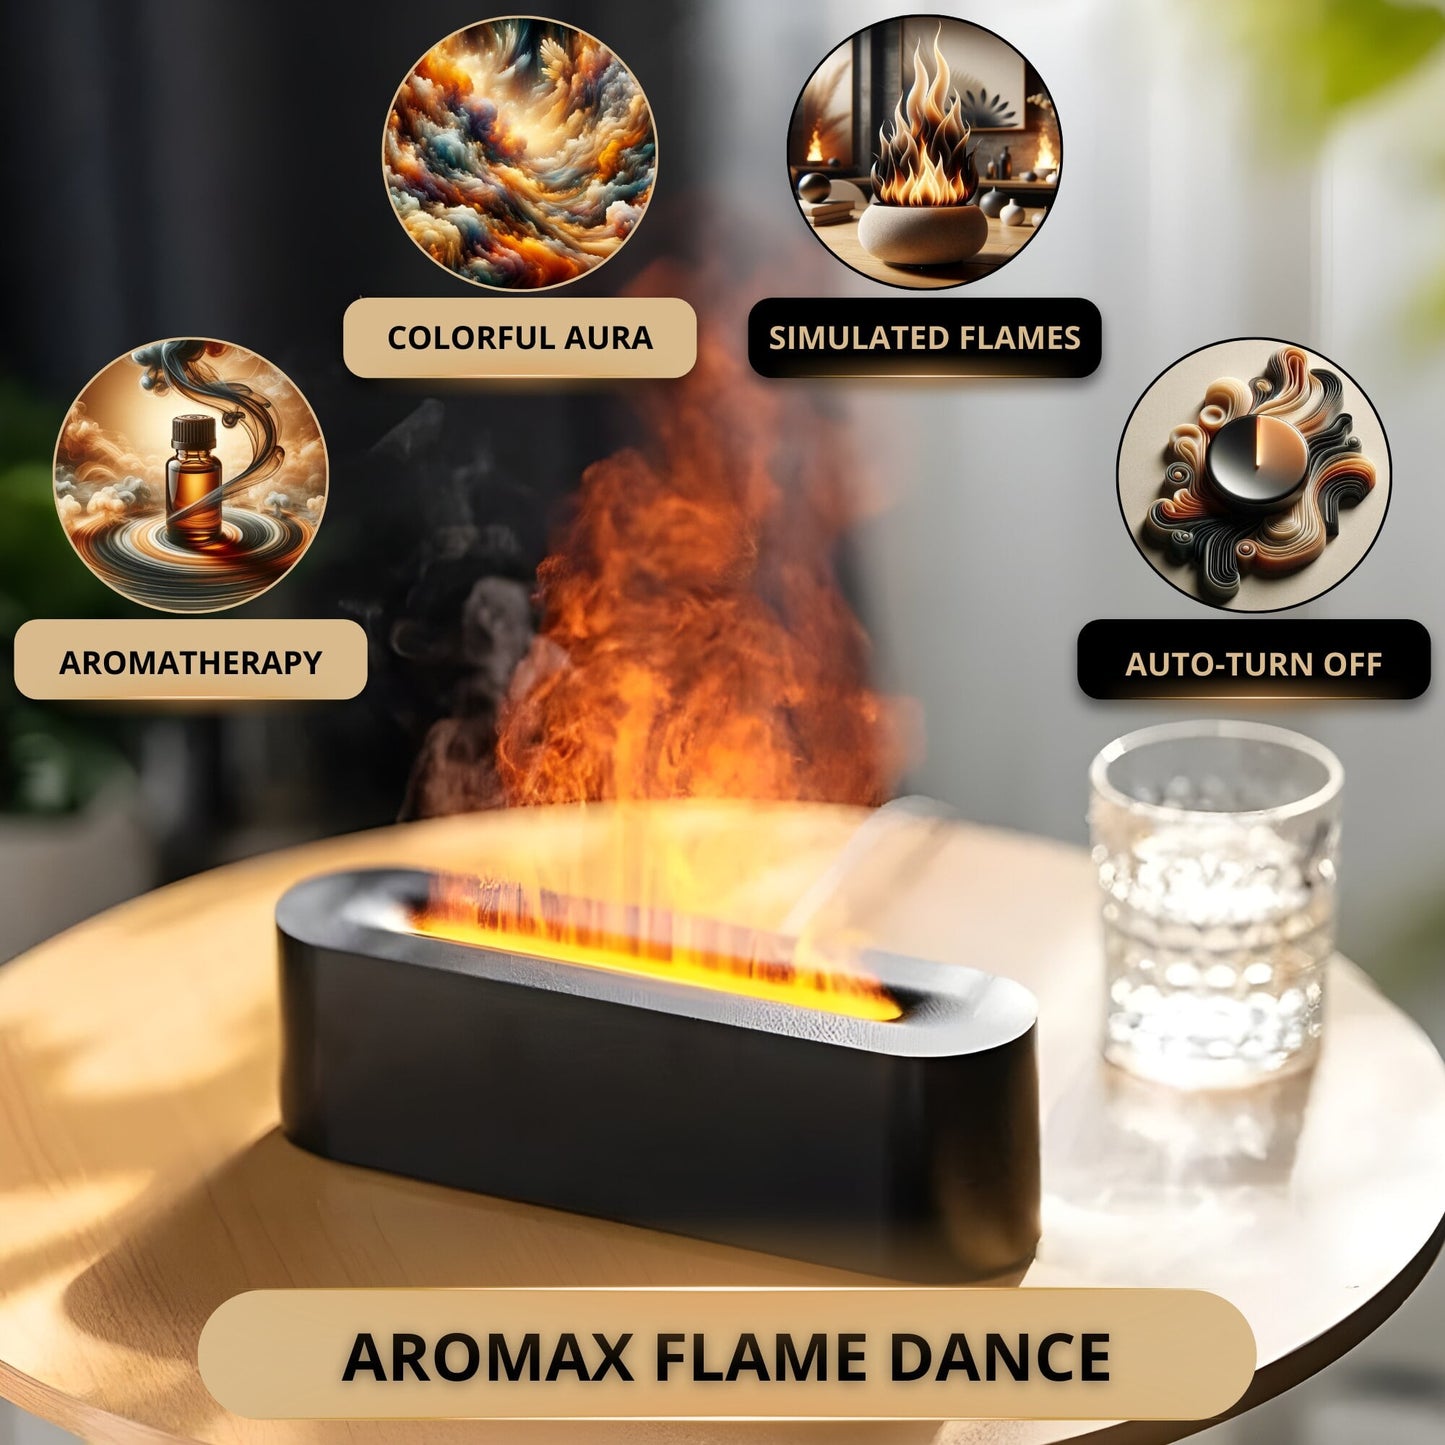 Black aroma humidifier with flame simulation in warm color on a brown circle table showcasing the benefits of aromatherapy.